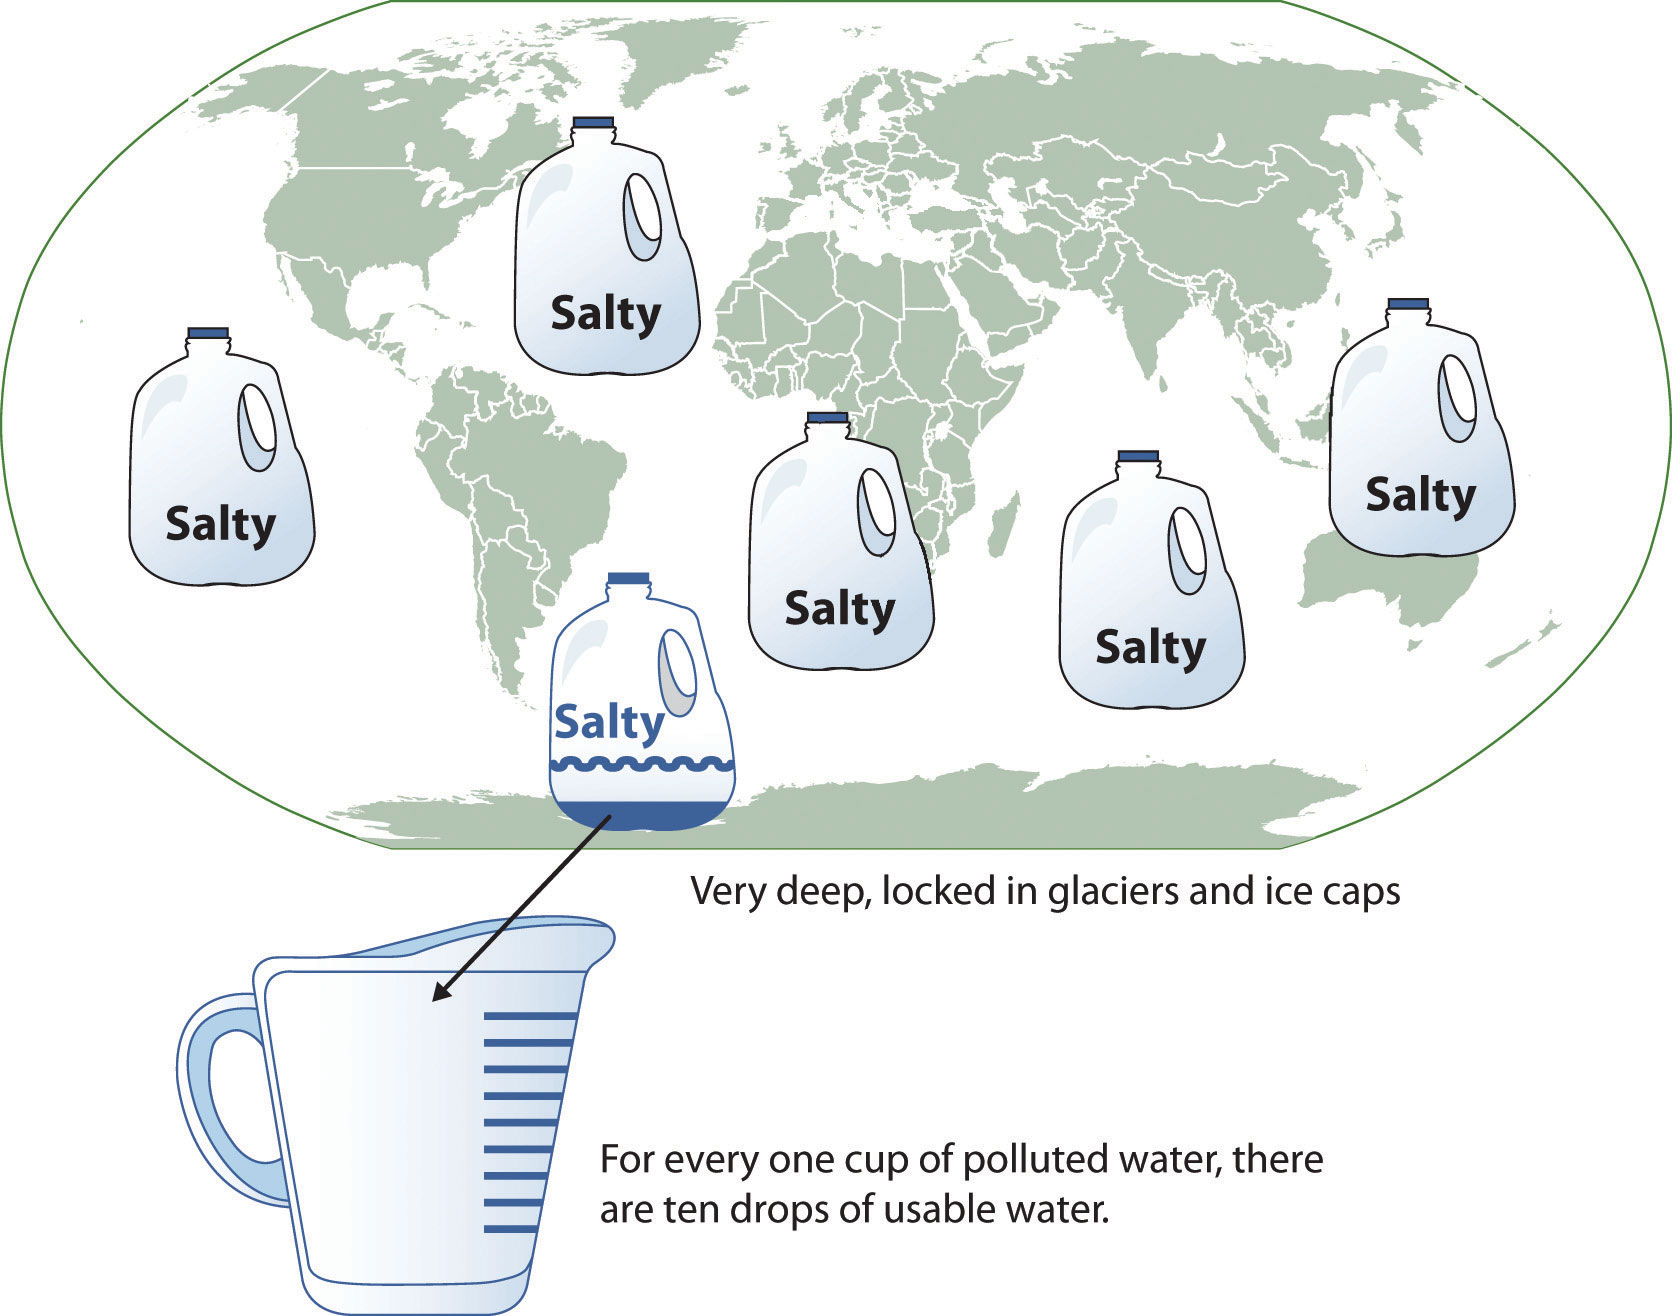 Graphic illustration of ten drops of usable water per one cup of polluted water